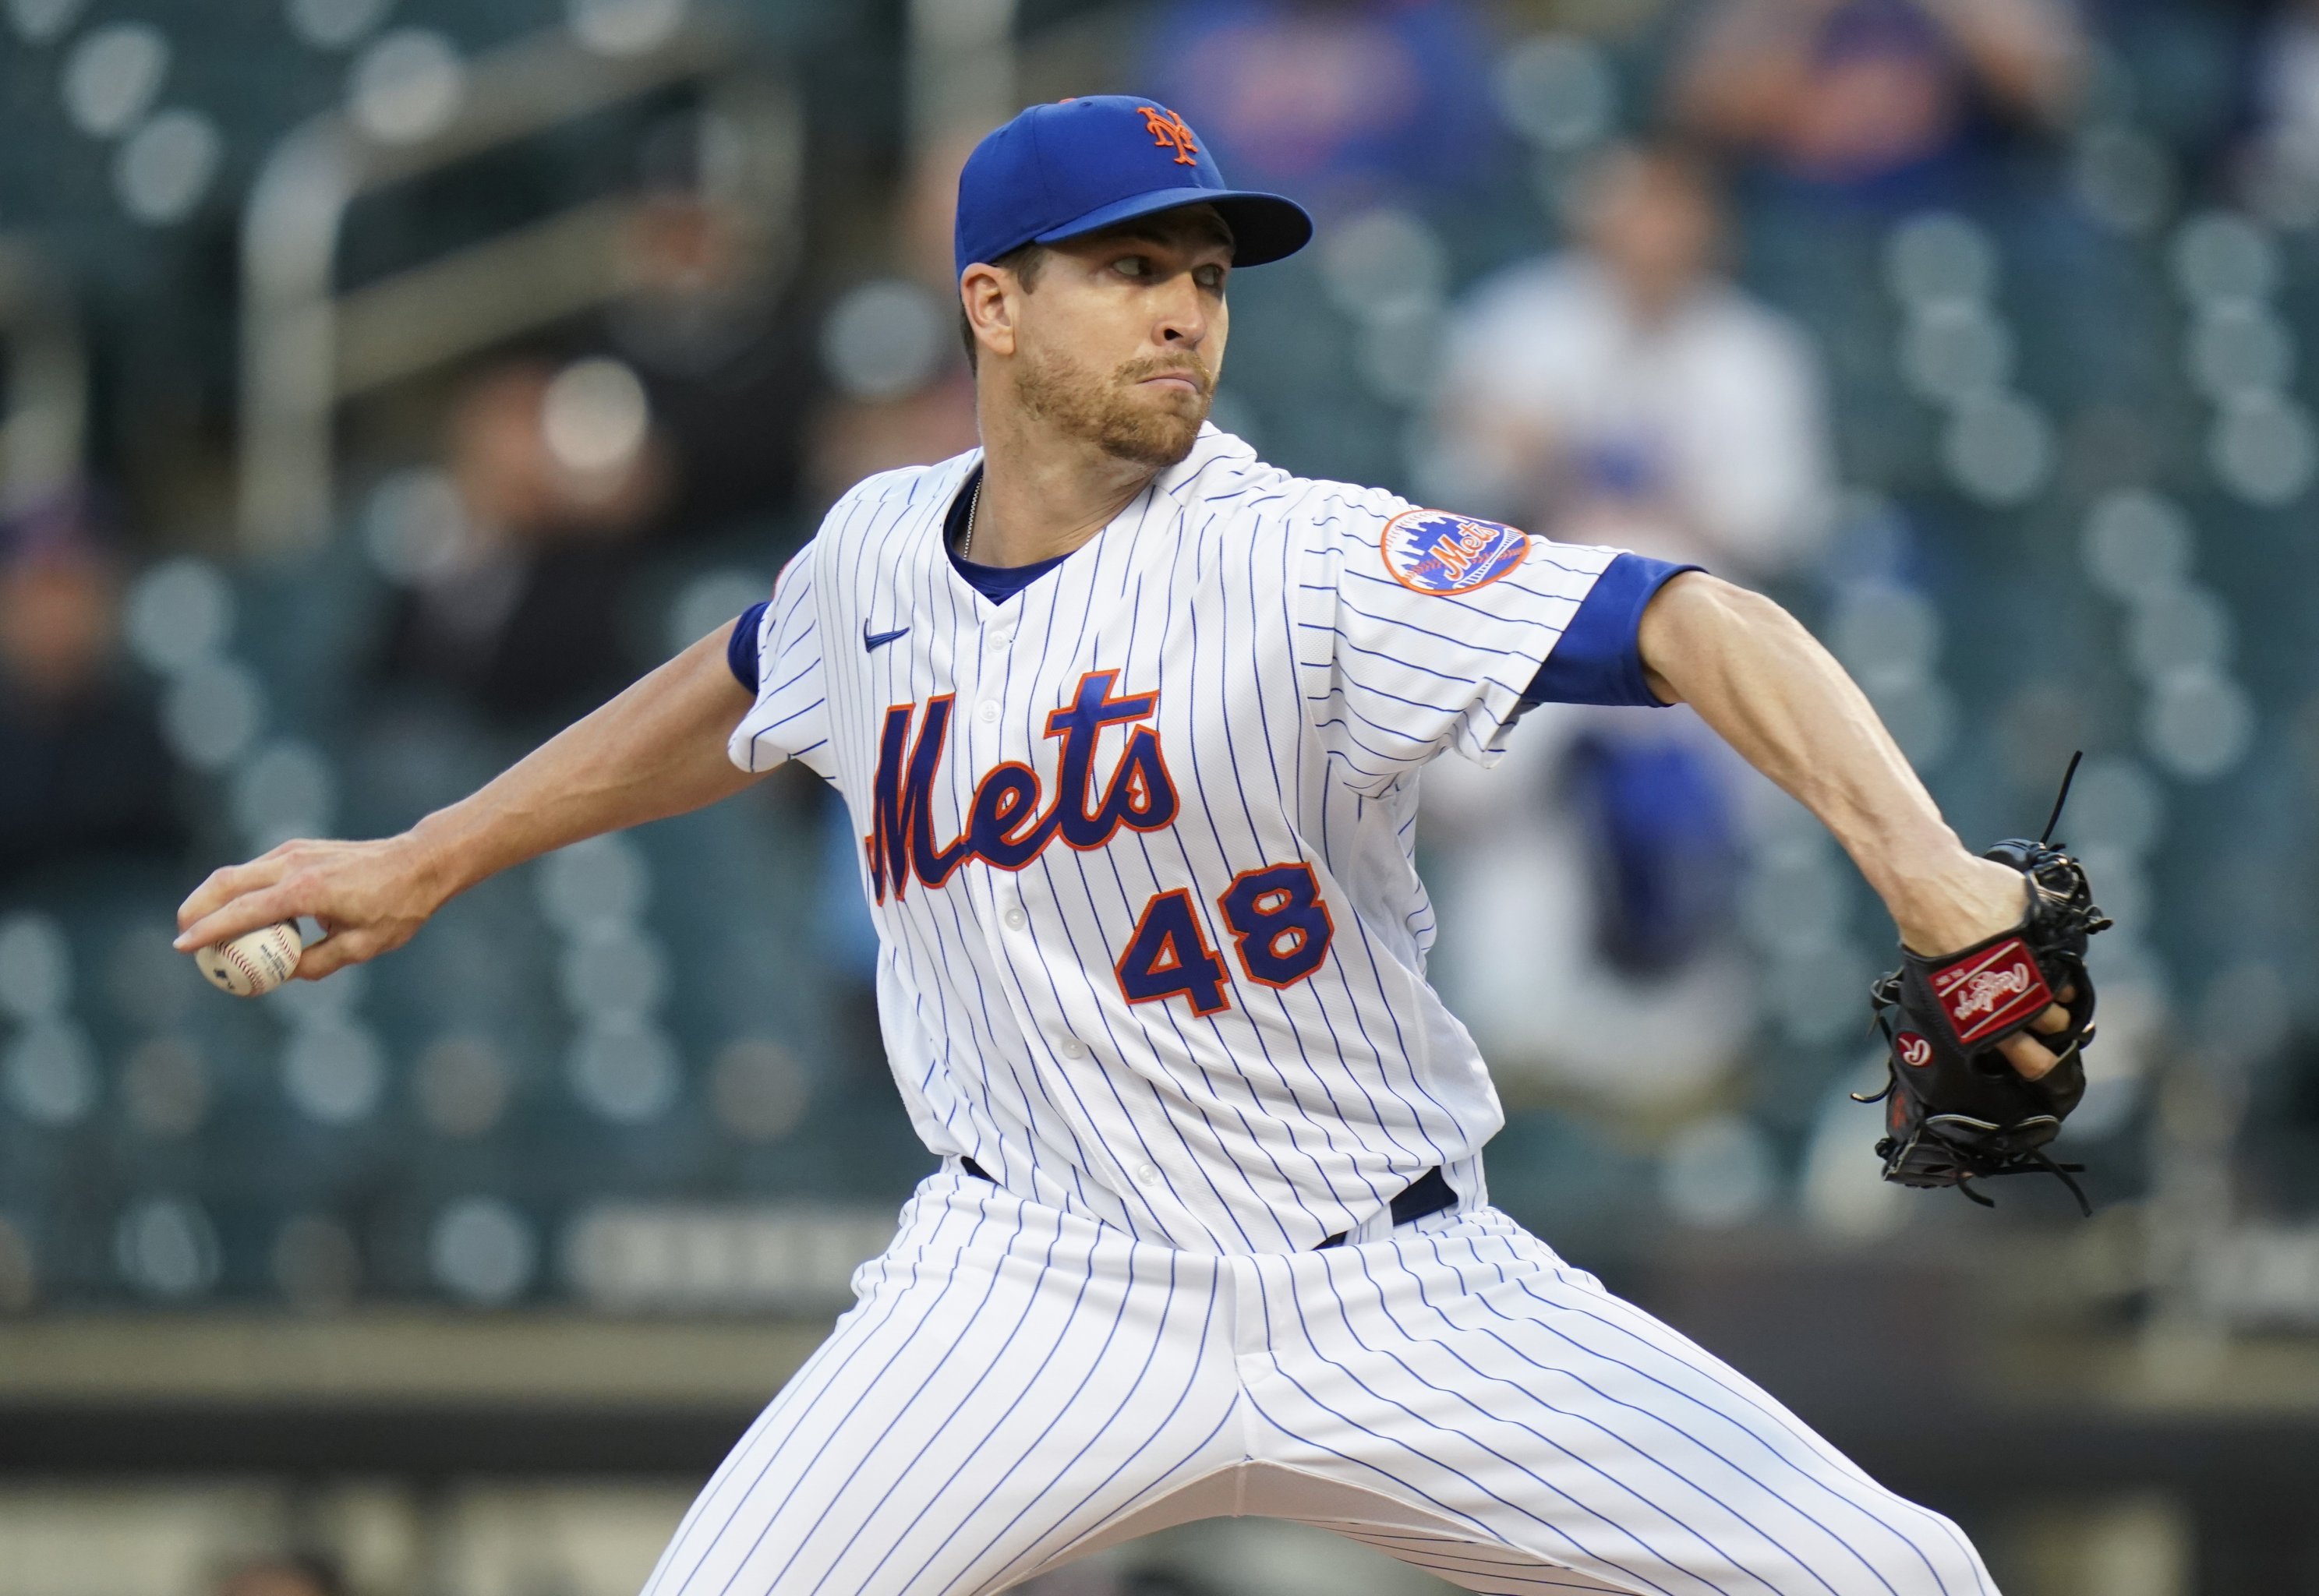 Sorry, Gerrit Cole; Mets' Jacob deGrom is still the best pitcher in New York